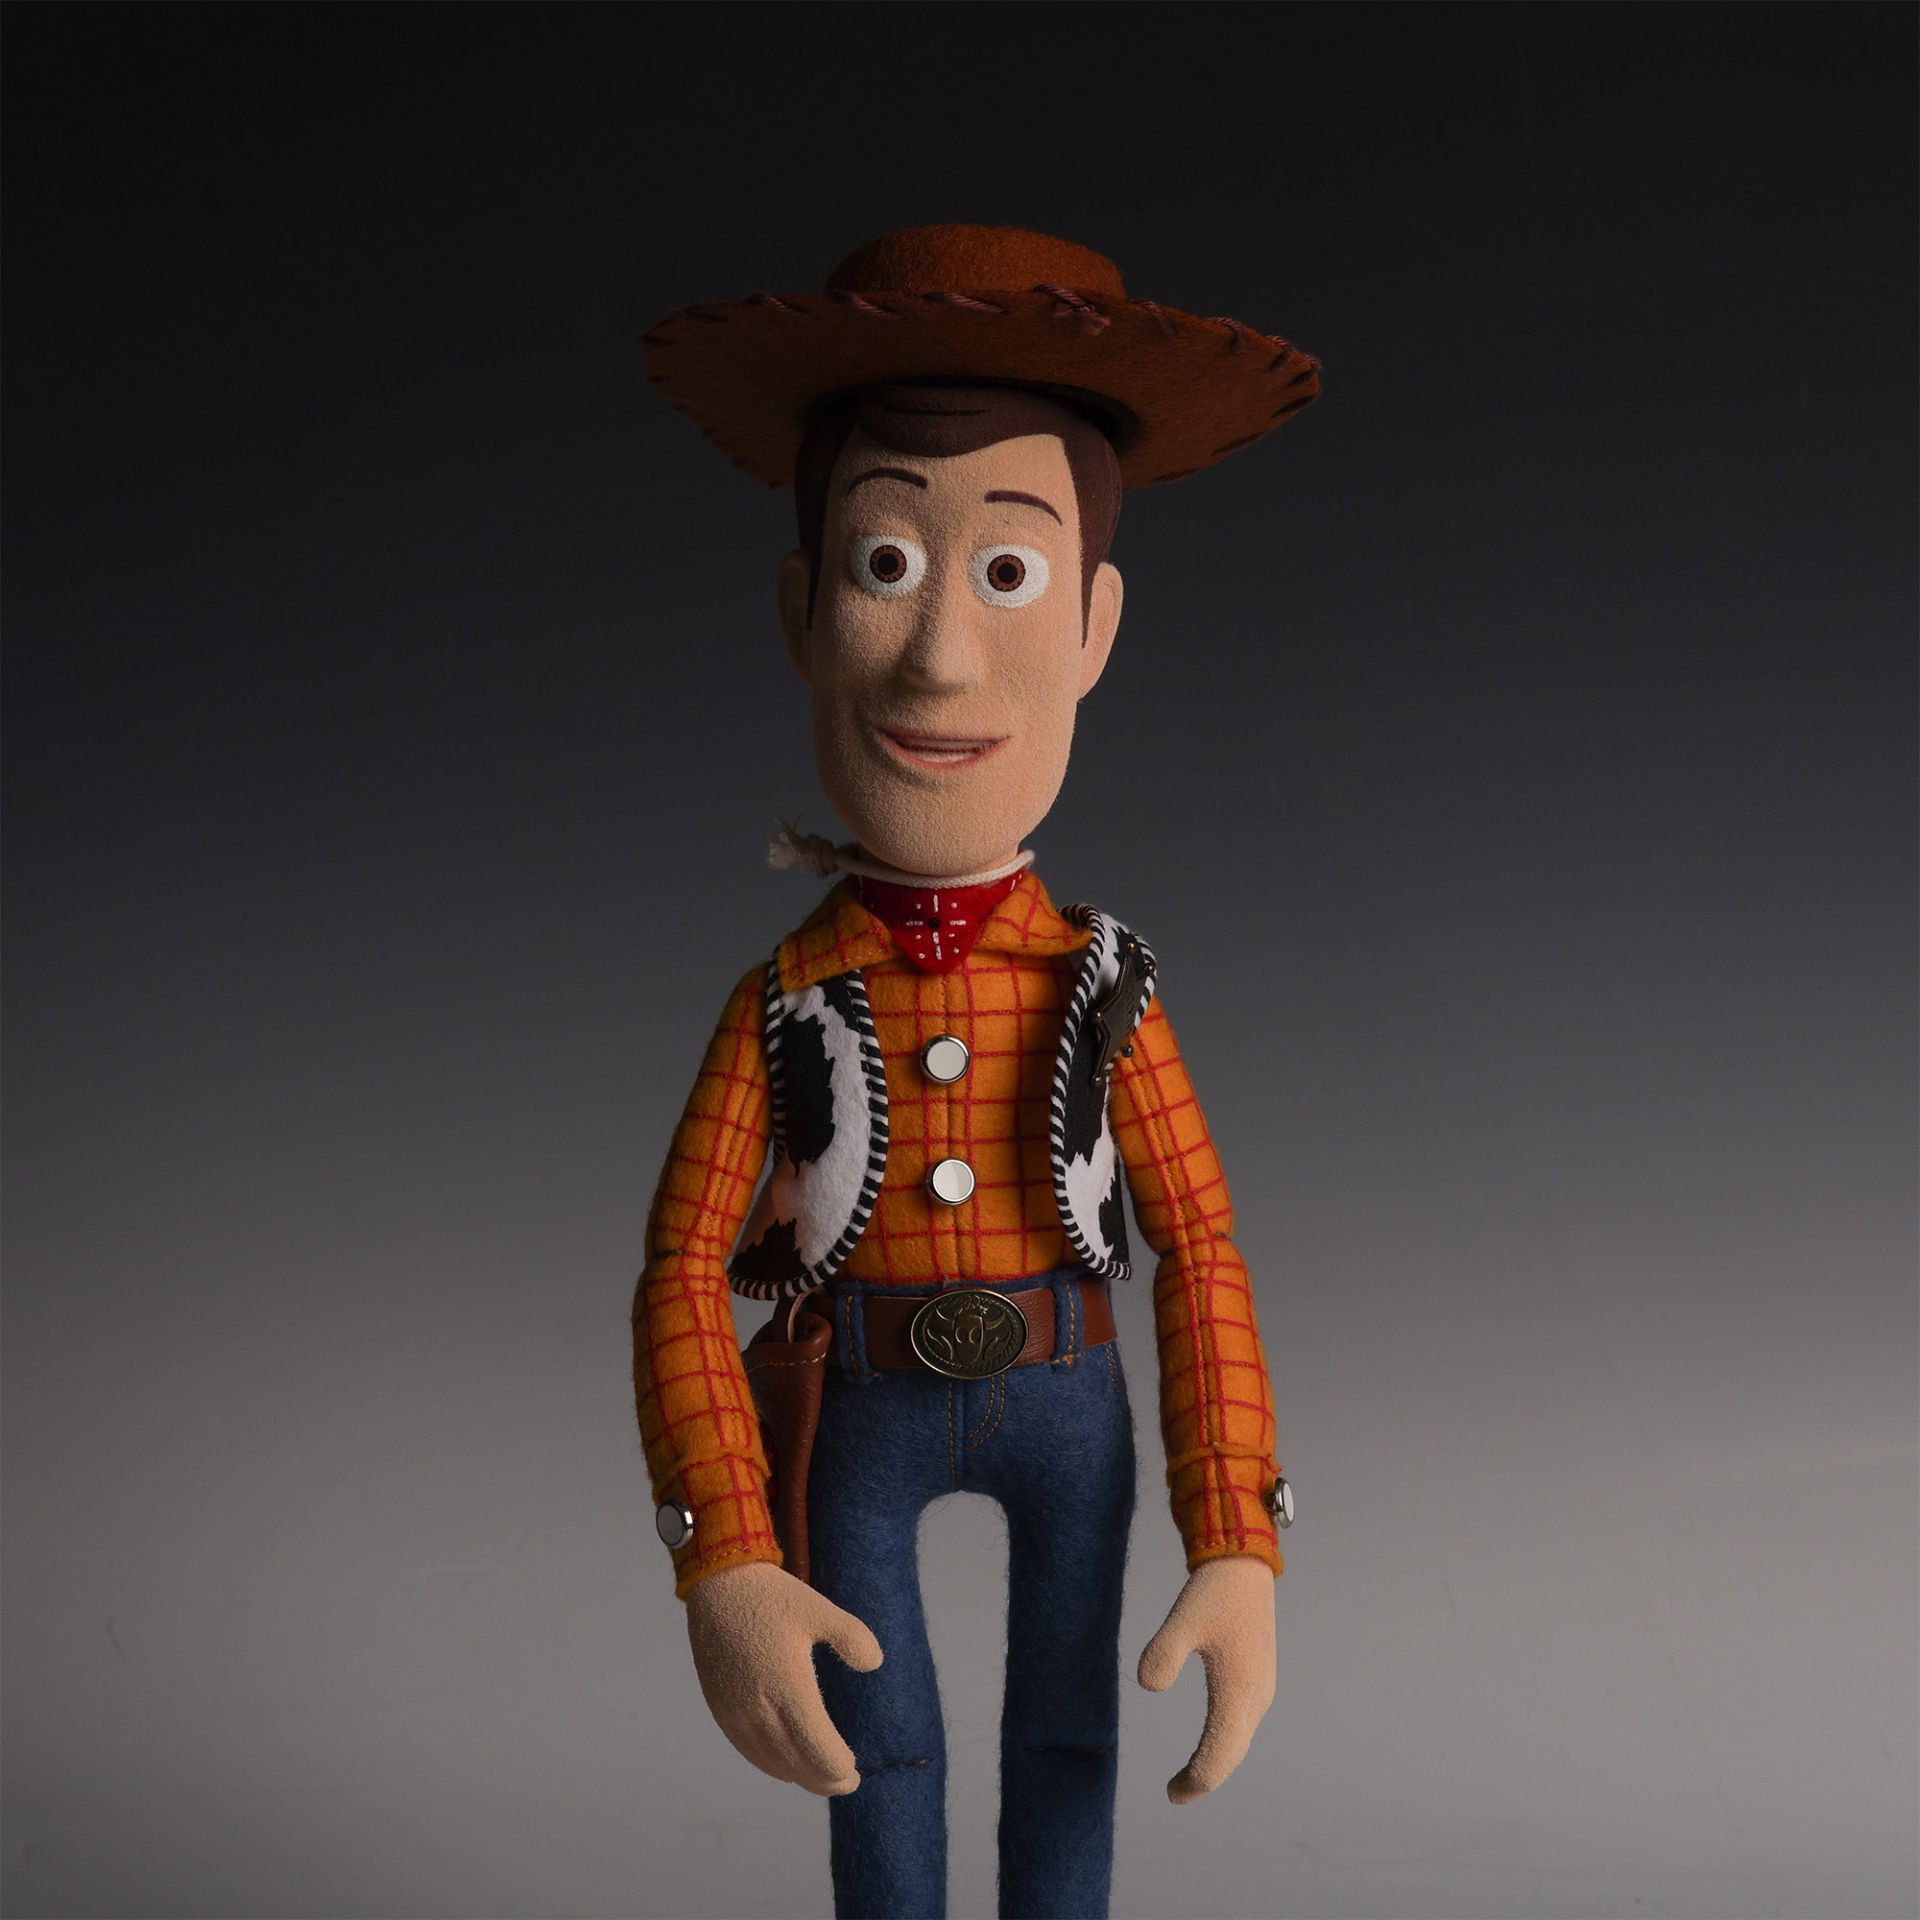 Steiff Character, Woody from Disney/Pixar's Toy Story - Image 6 of 12